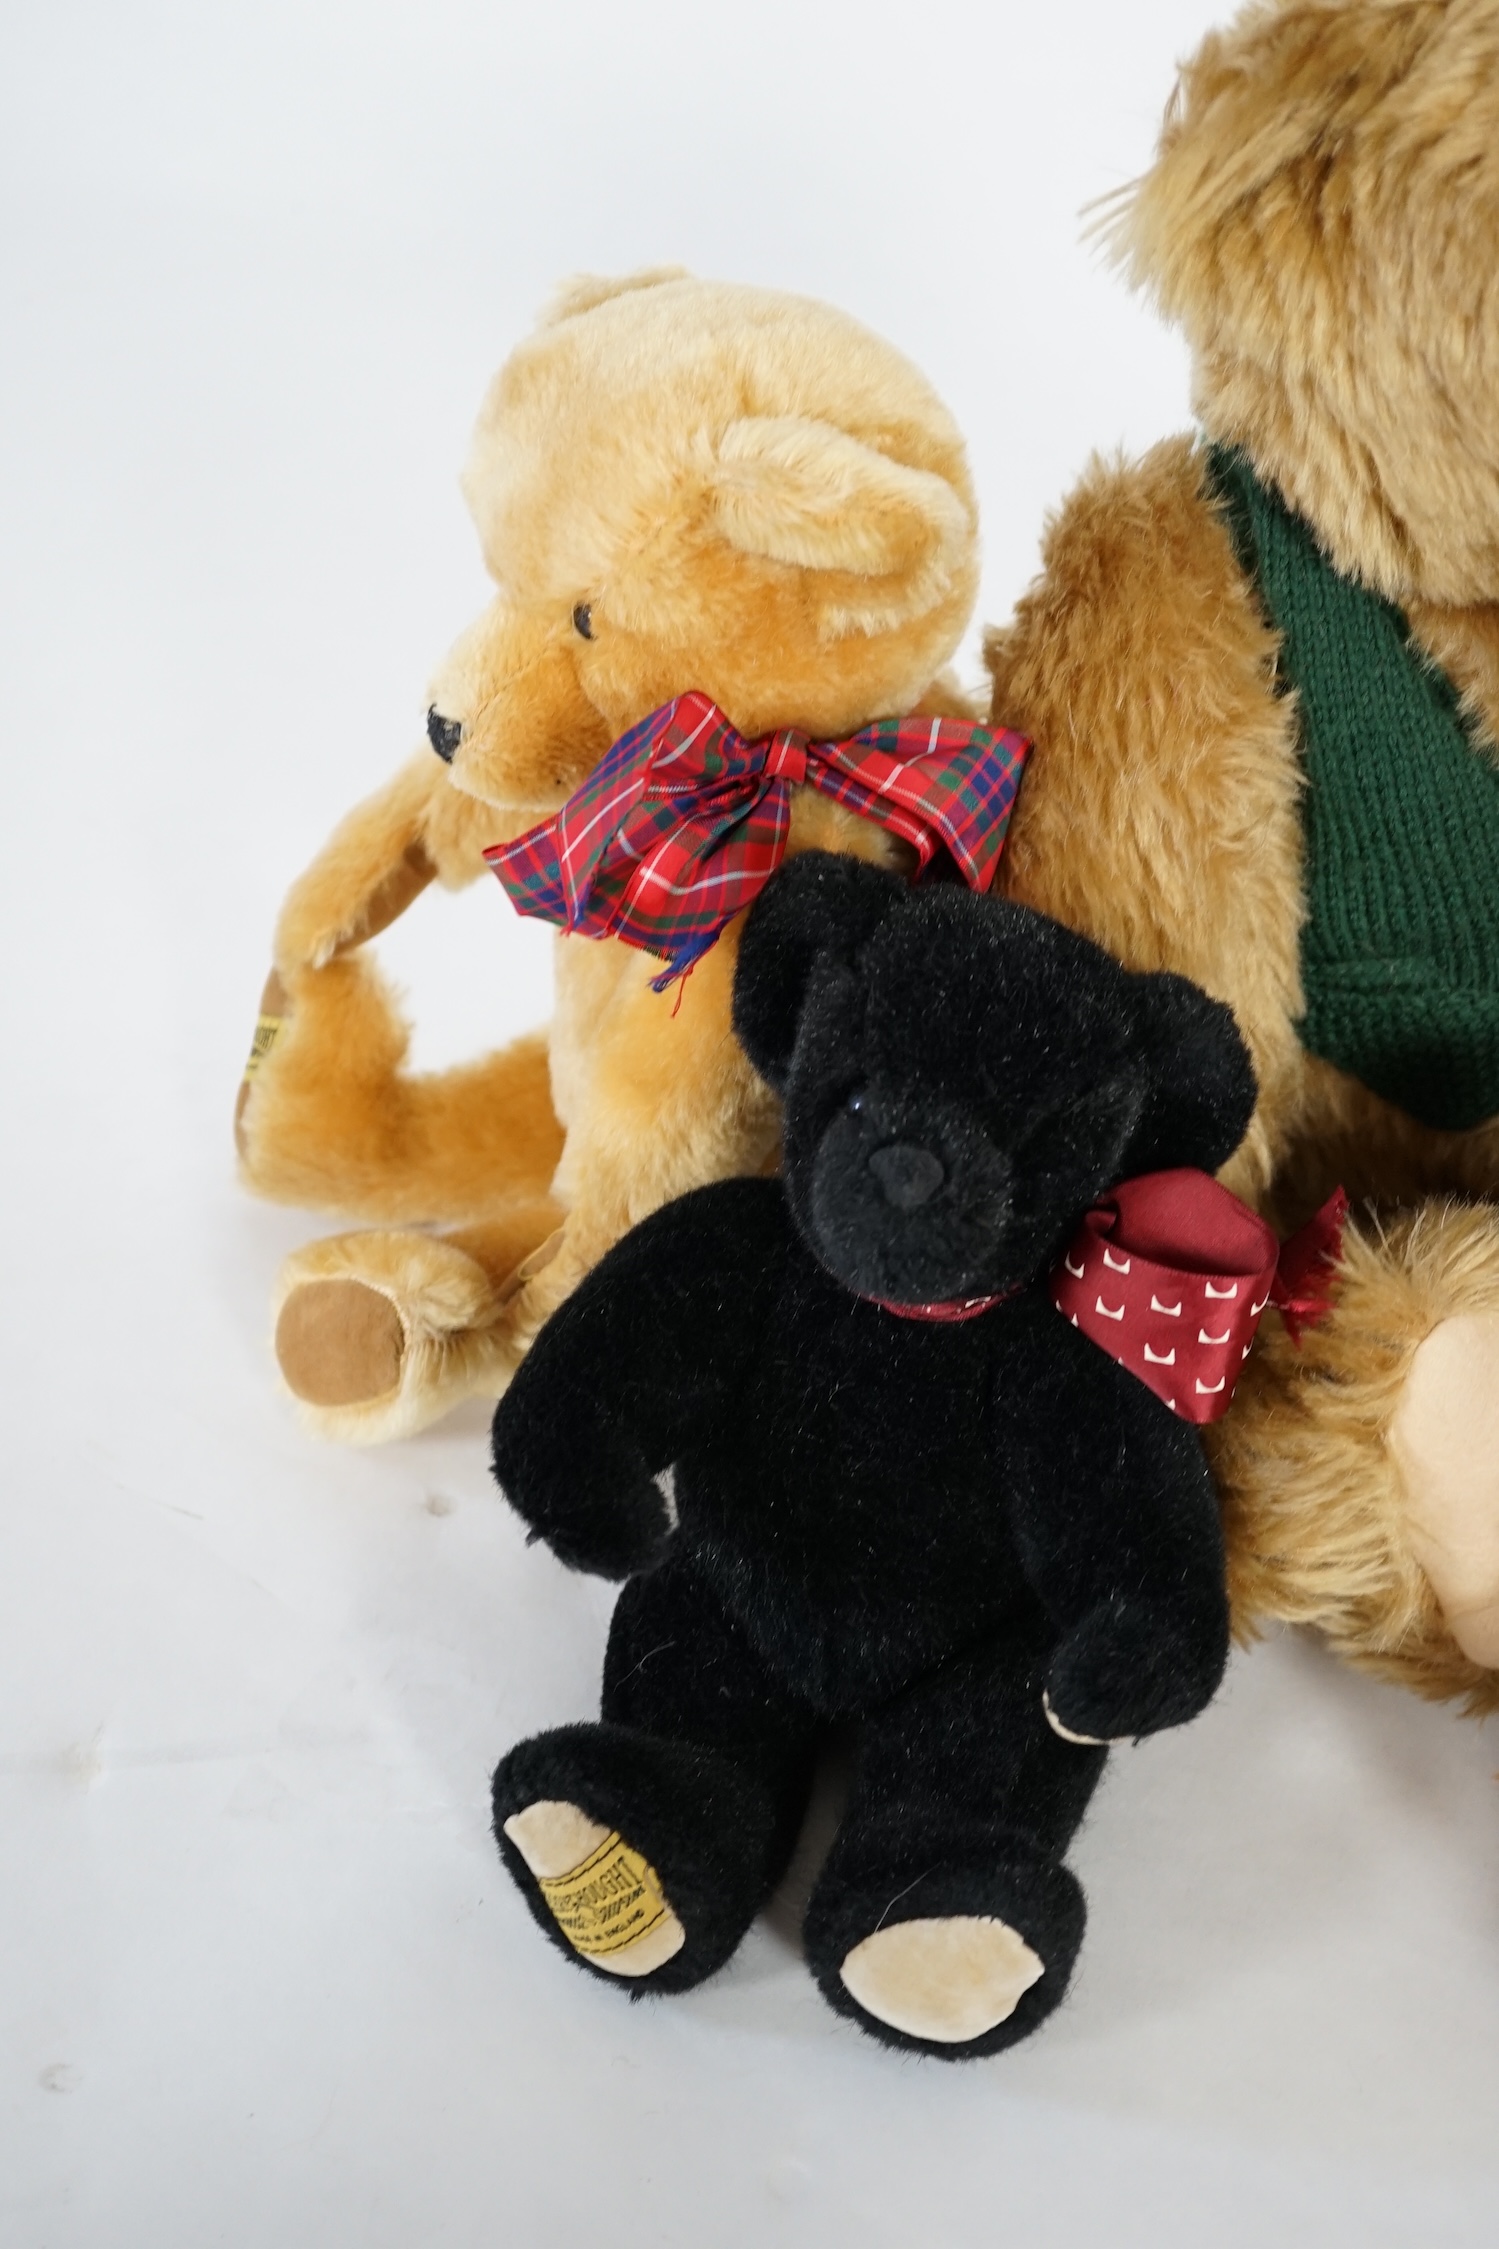 A large 1906 Steiff orange label, two Merrythought John Lewis bears, a black Merrythought bear, an - Image 5 of 5